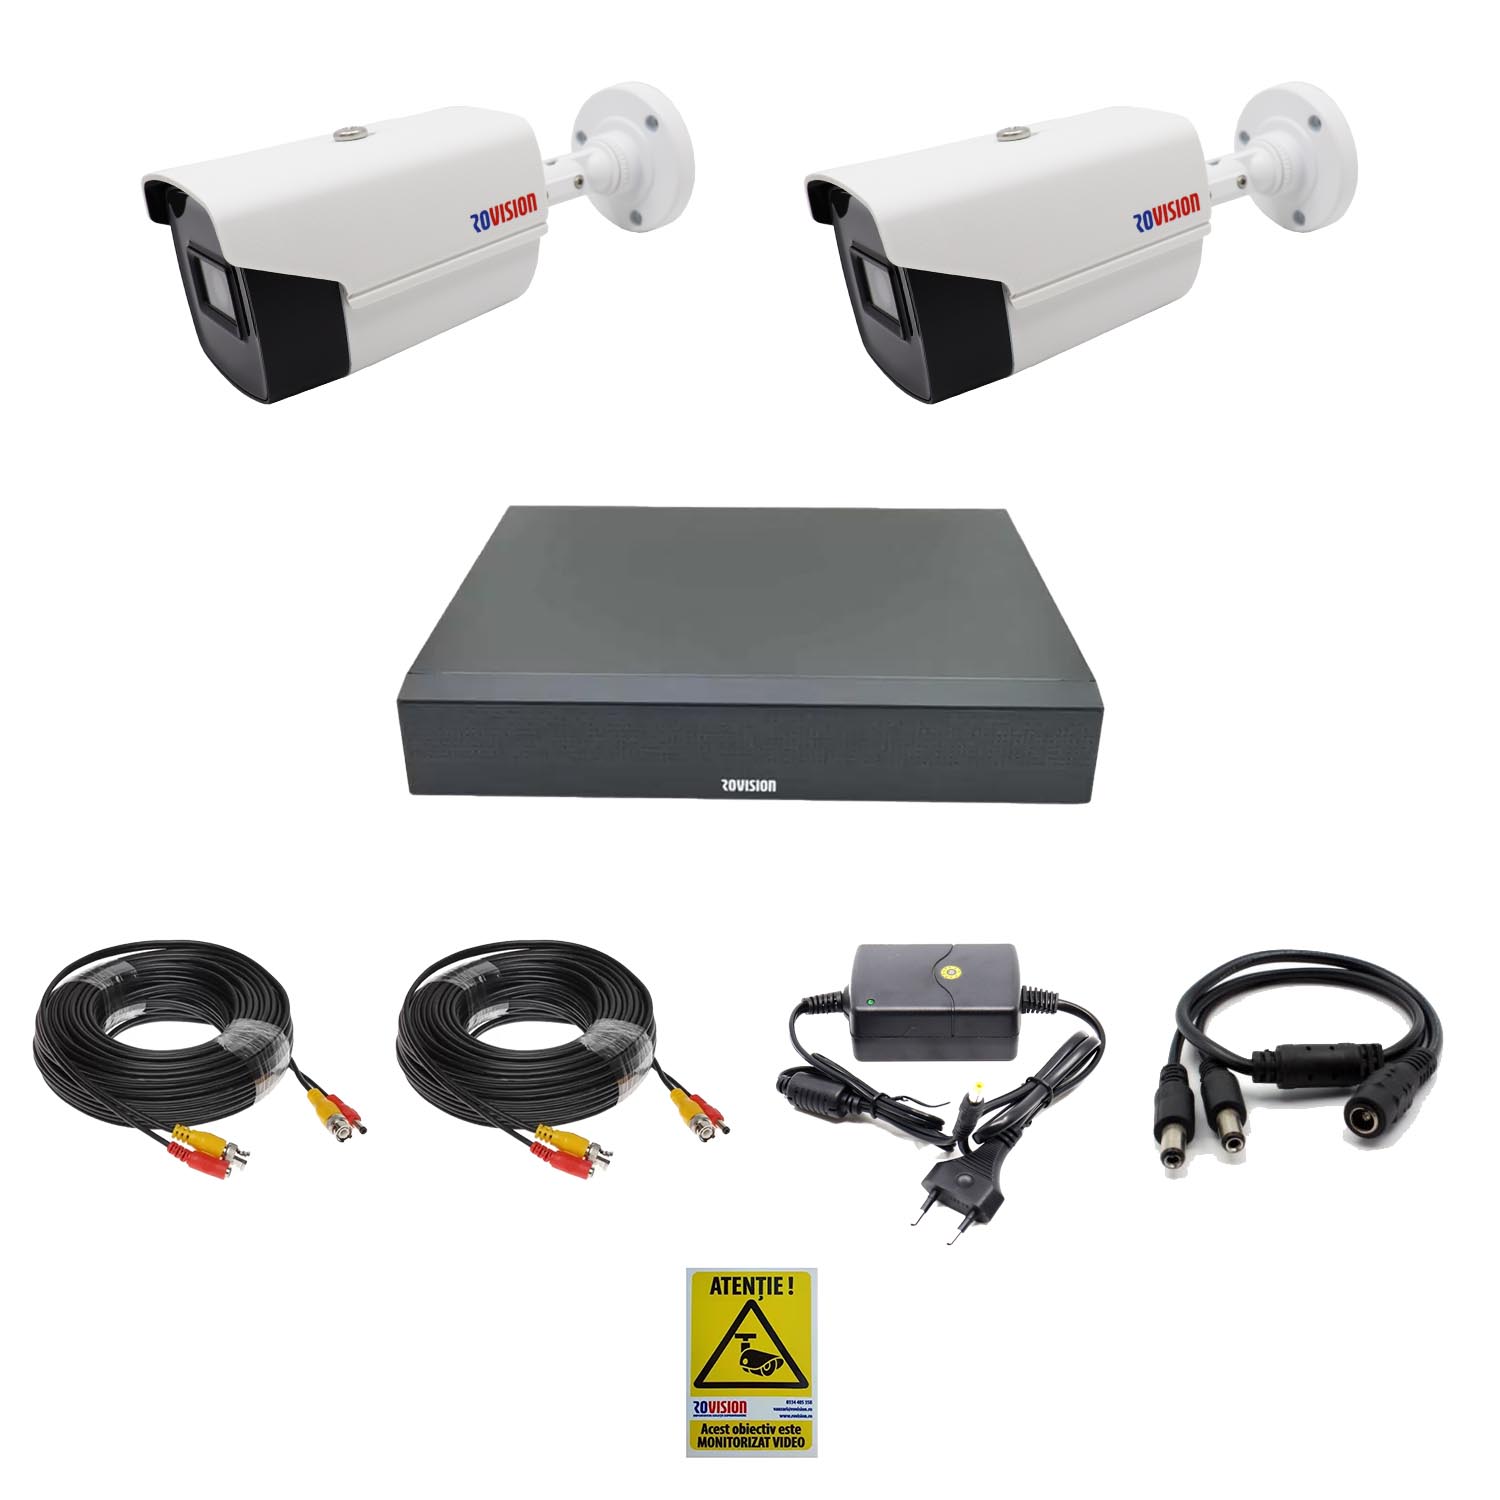 Sistem supraveghere video 2 camere exterior 2MP 1080P full hd, IR 40m, DVR 4 canale, accesorii full